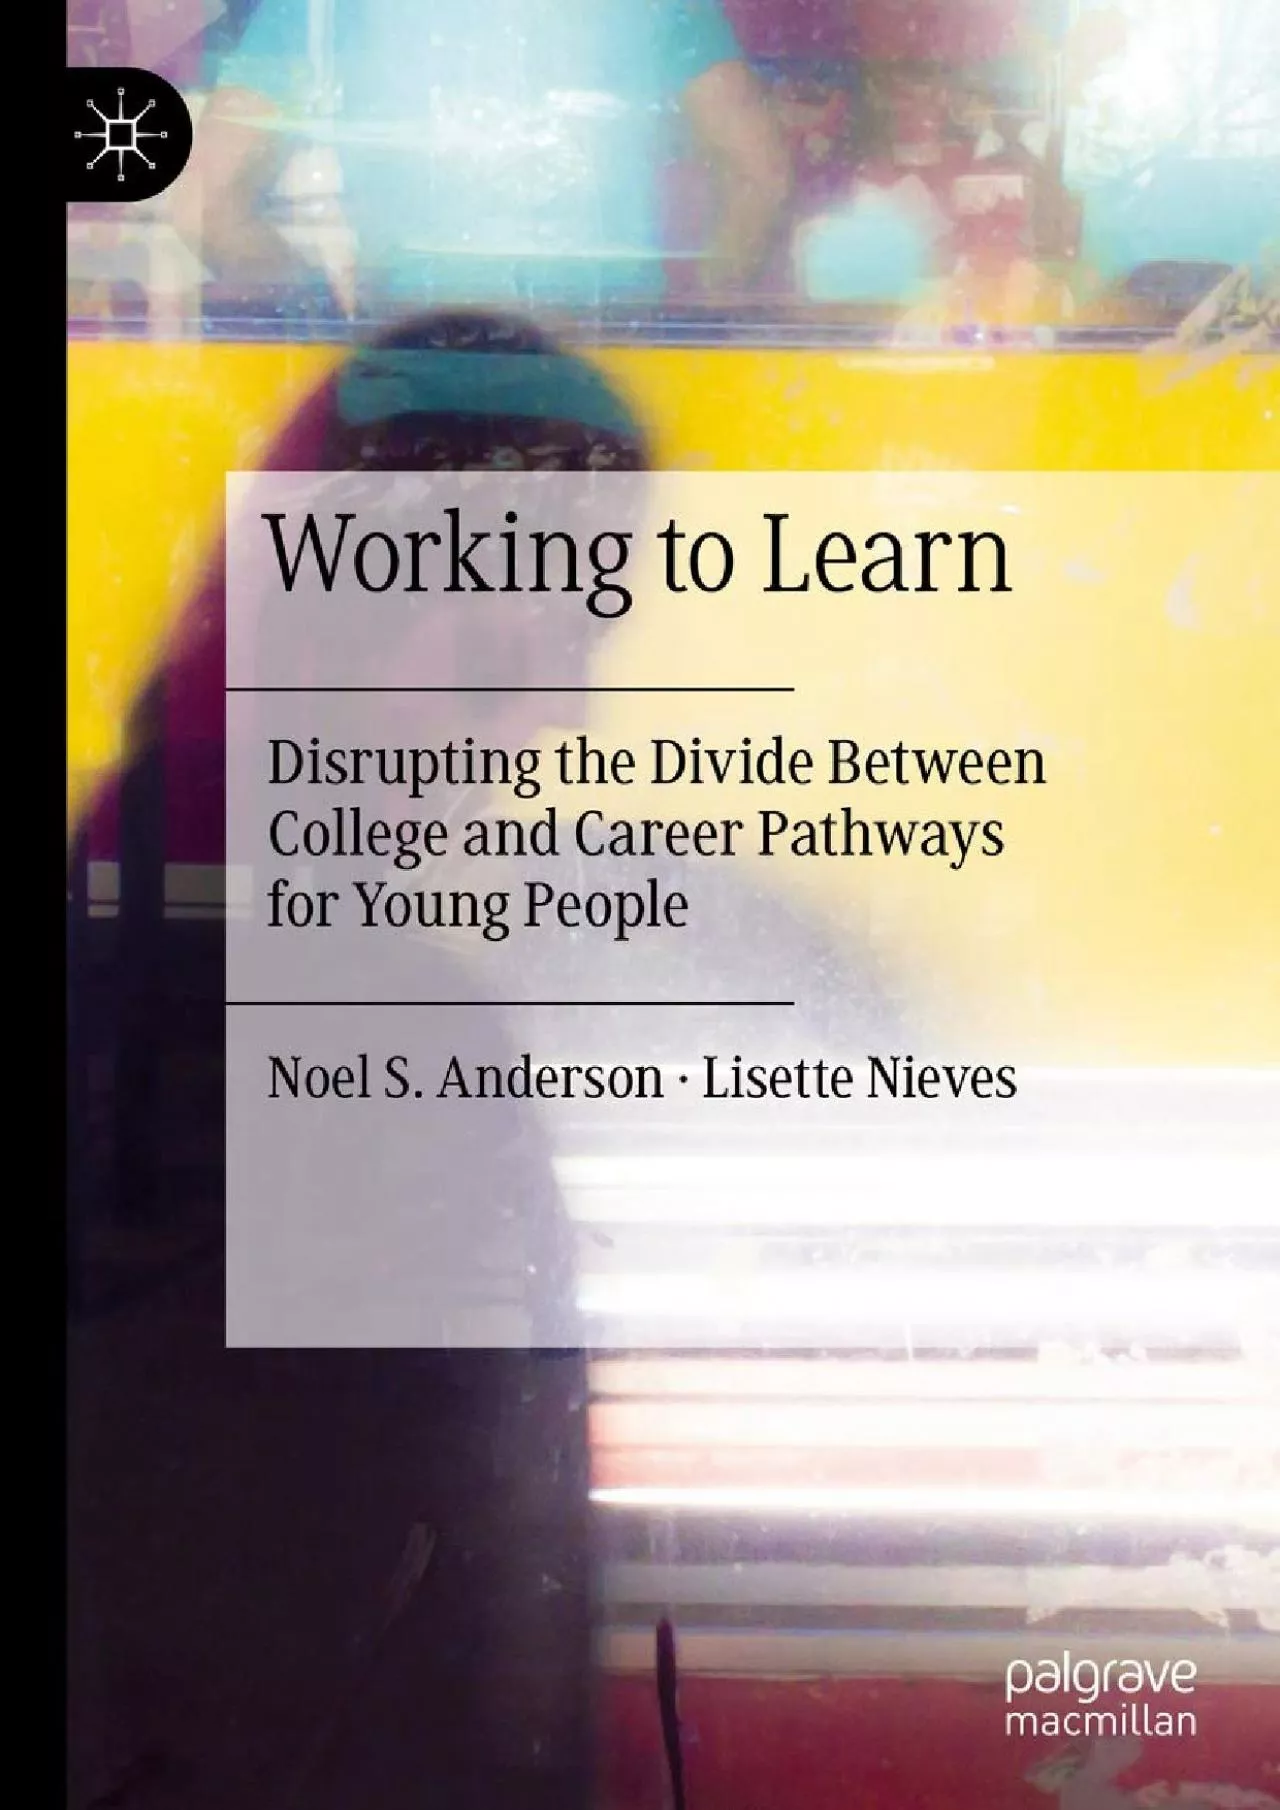 [EBOOK] Working to Learn: Disrupting the Divide Between College and Career Pathways for